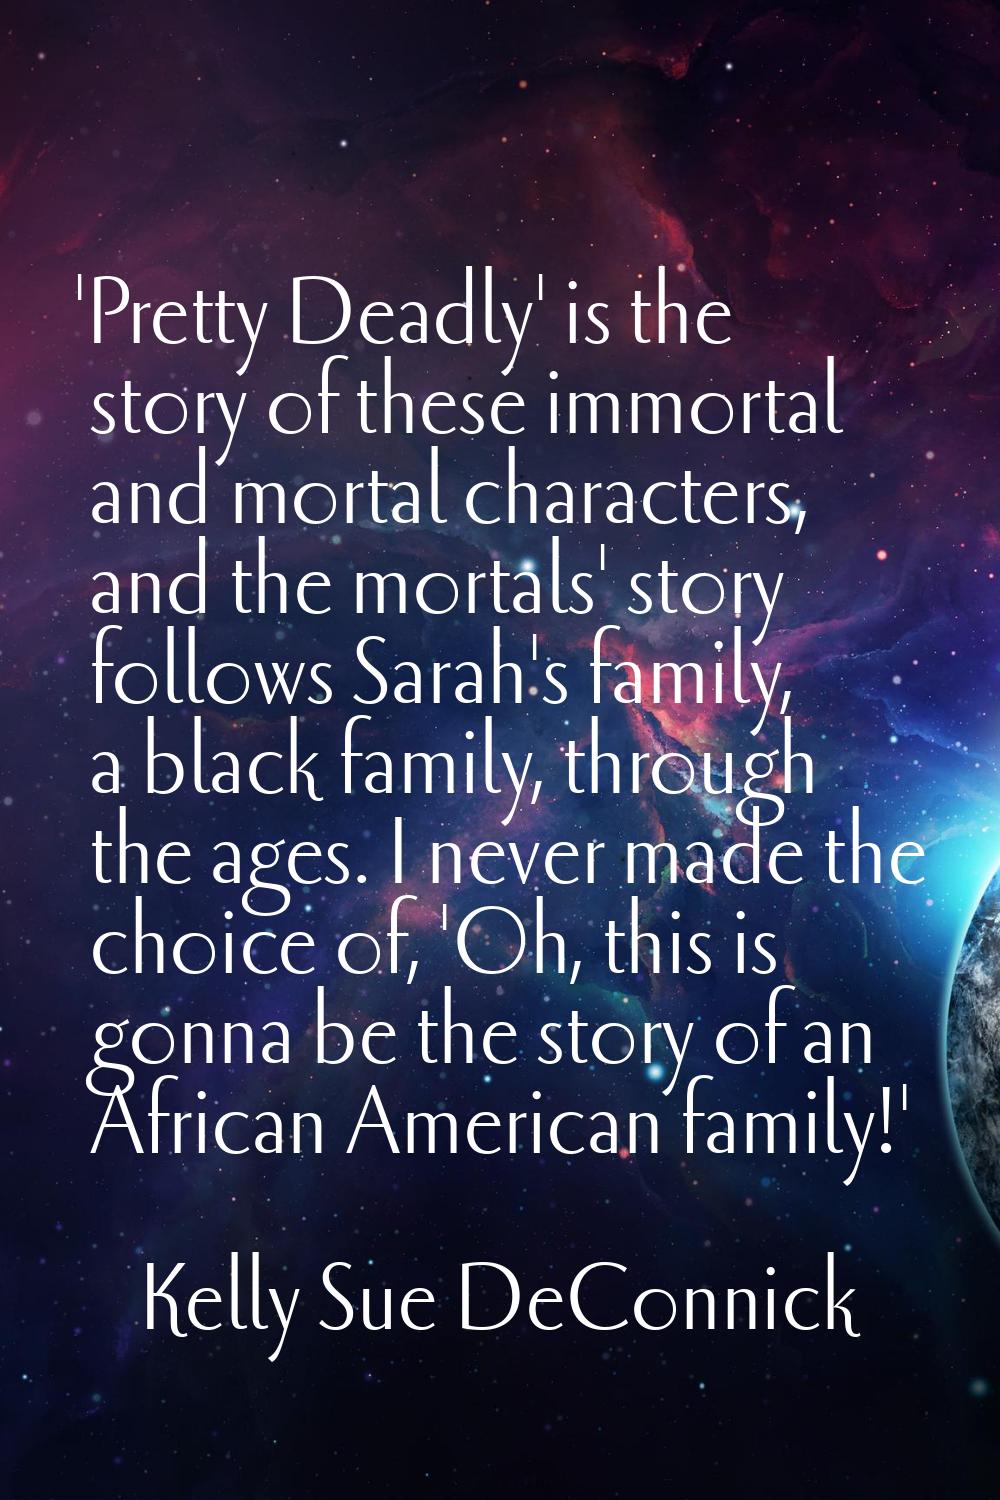 'Pretty Deadly' is the story of these immortal and mortal characters, and the mortals' story follow